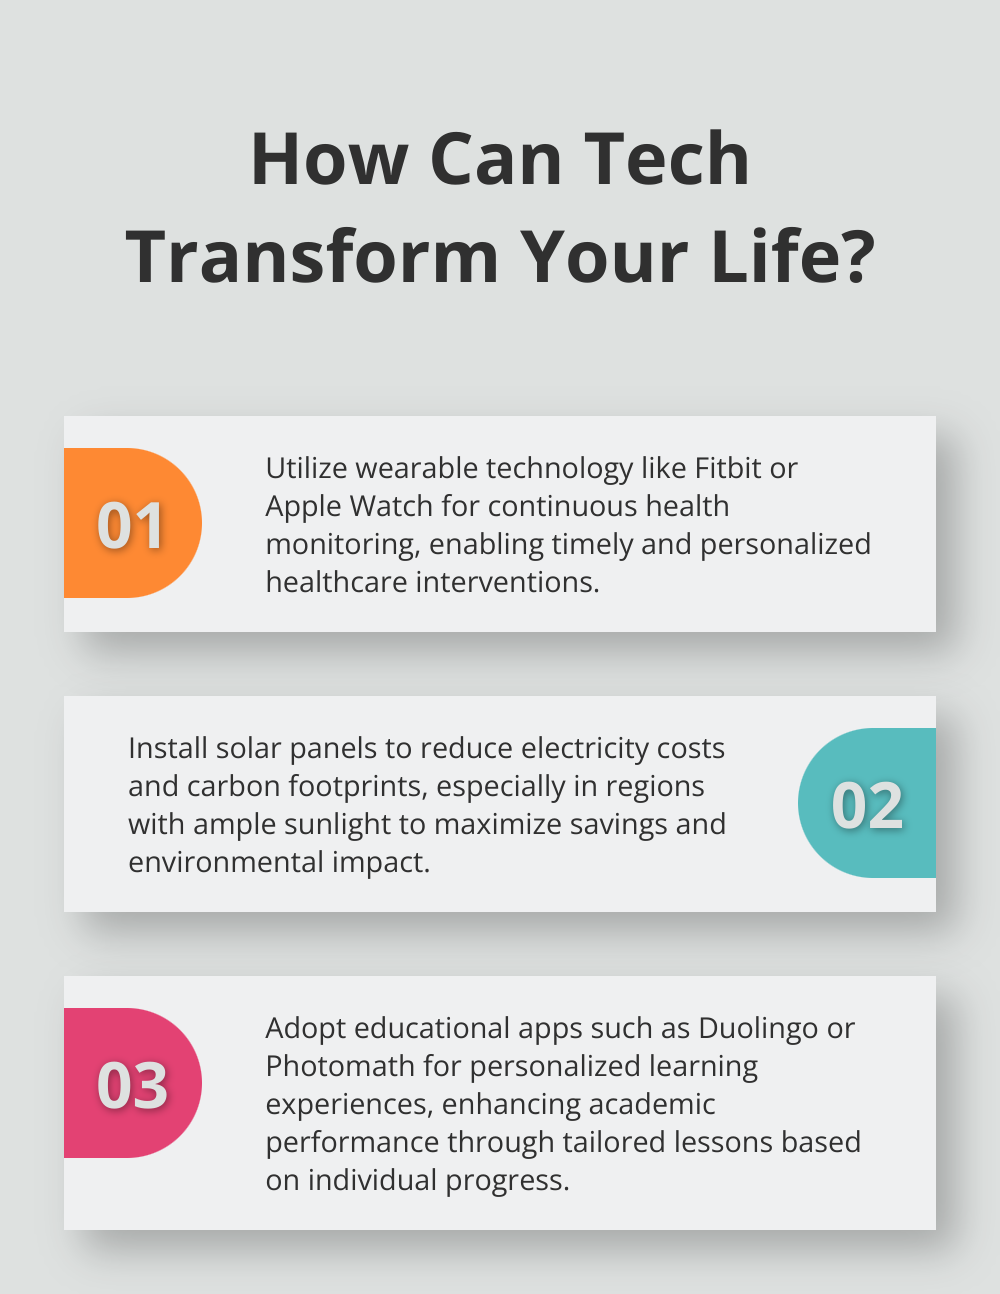 Fact - How Can Tech Transform Your Life?